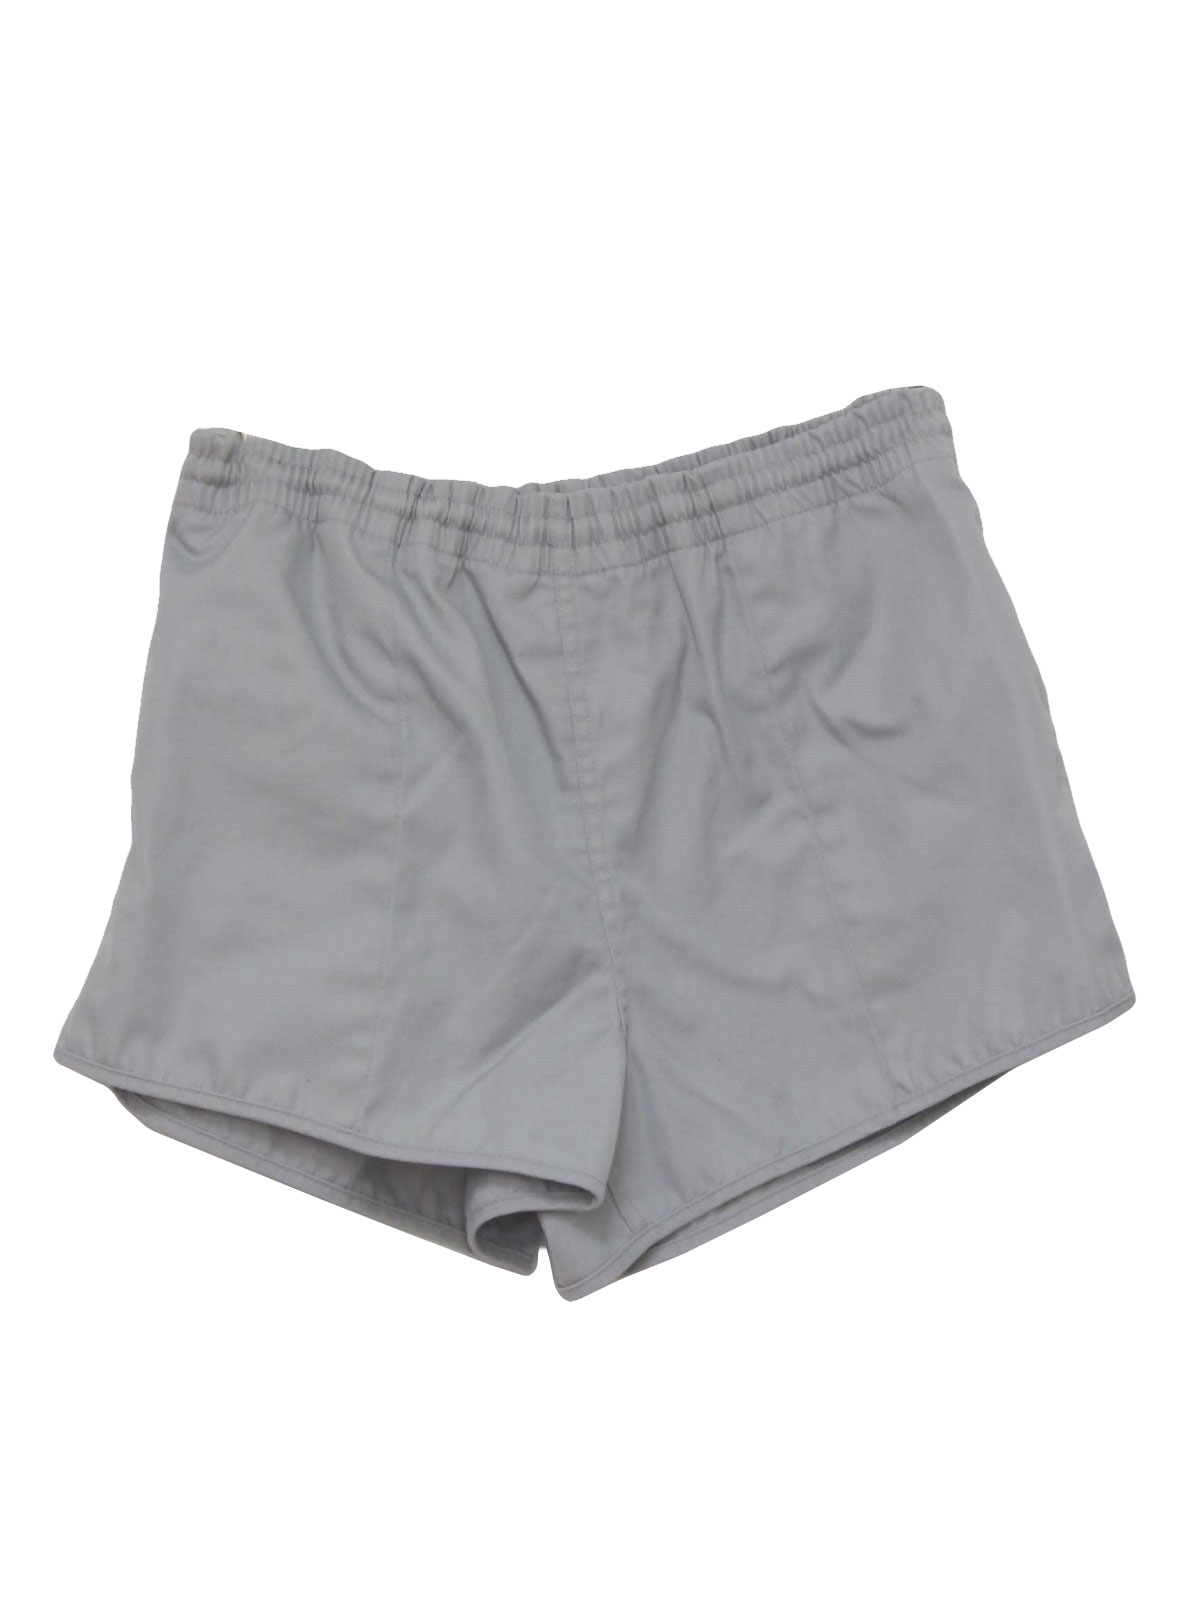 Retro 80s Shorts (Woolrich) : 80s -Woolrich- Mens light gray polyester ...